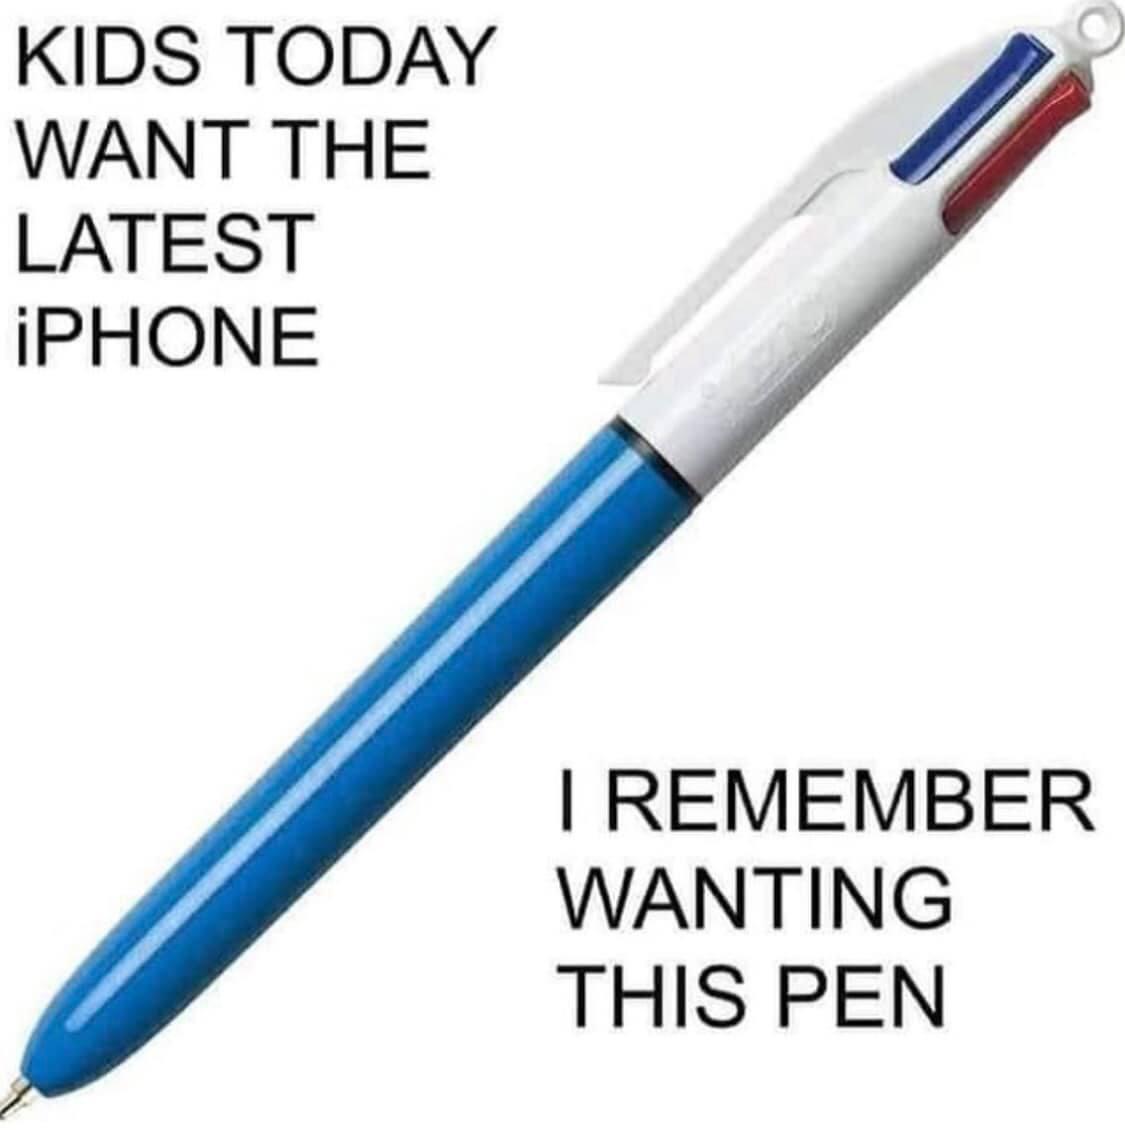 funny memes - dank memes - available - Kids Today Want The Latest iPHONE I Remember Wanting This Pen